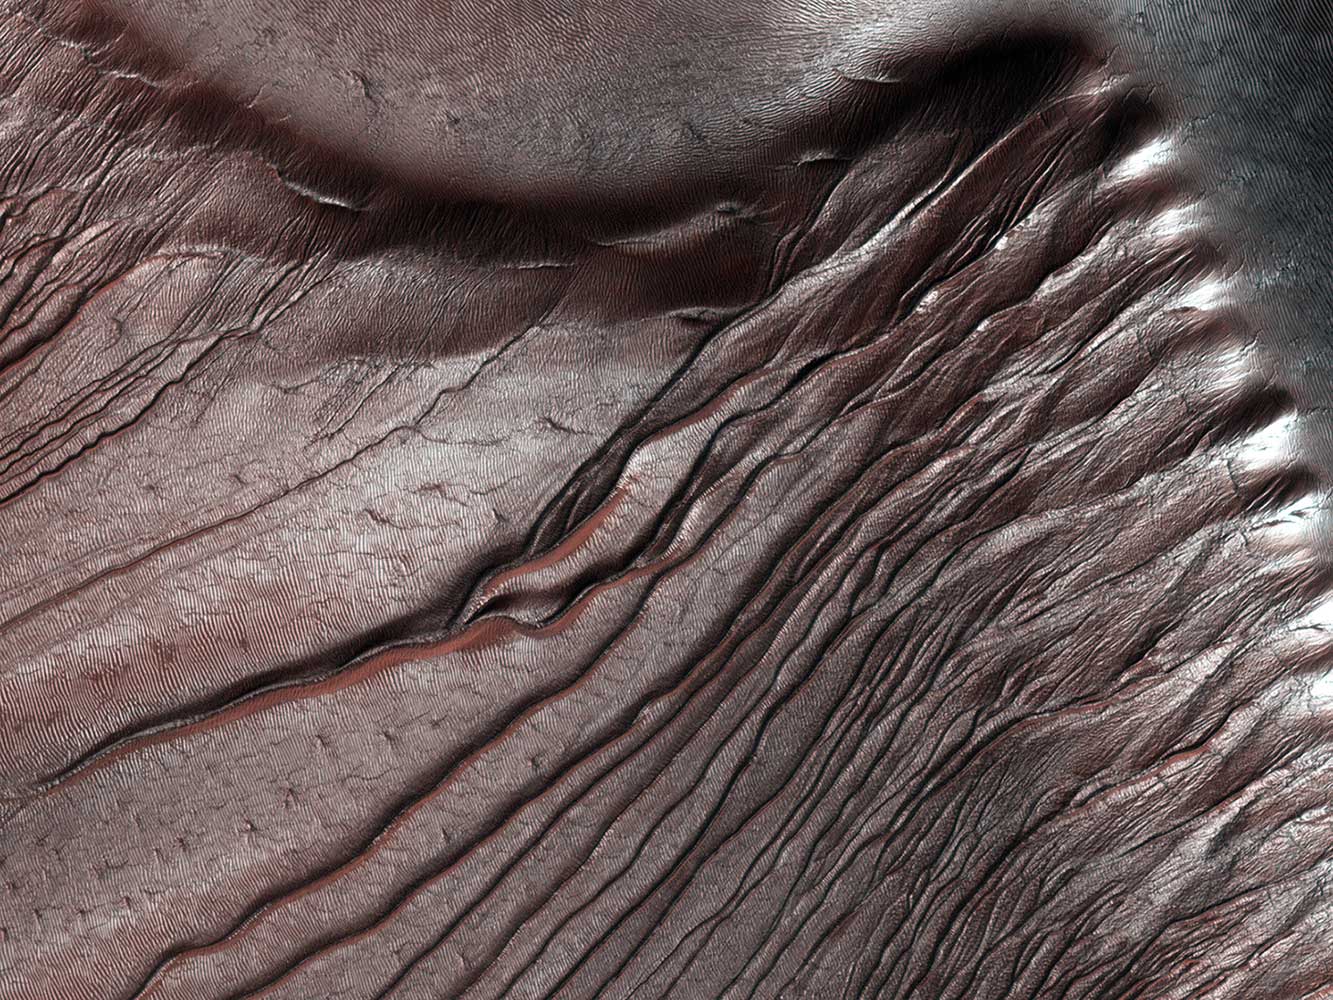 Russell Crater dunes on Mars released on Feb. 5, 2014.